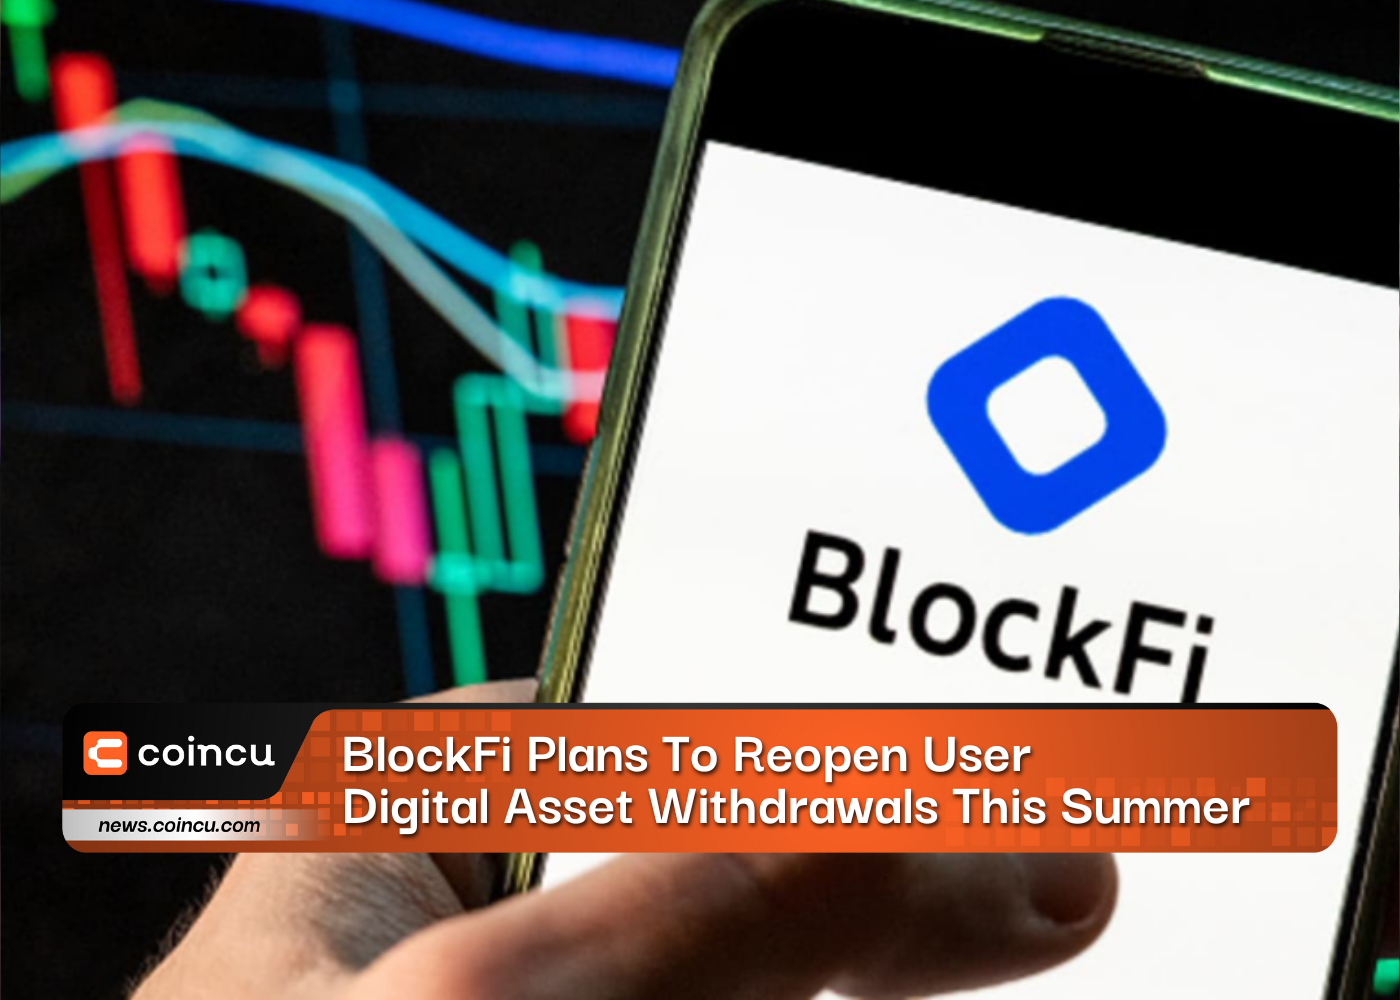 BlockFi Plans To Reopen User Digital Asset Withdrawals This Summer